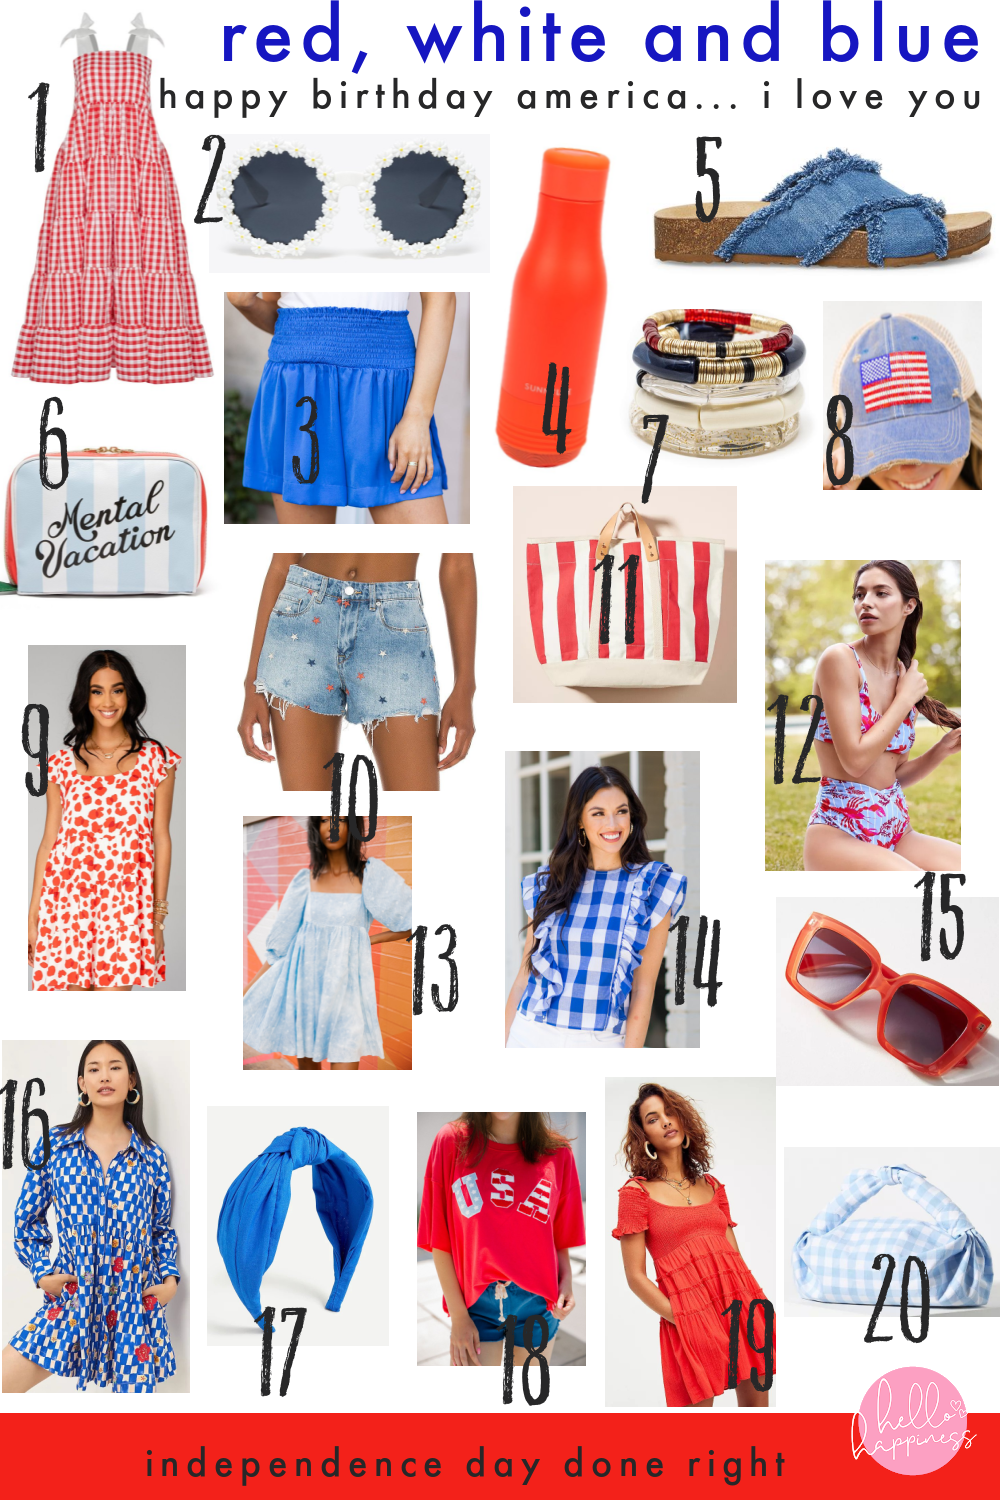 4th of July Outfits by popular Nashville fashion blog, Hello Happiness: collage image of a red and white gingham maxi dress, daisy frame sunglasses, denim cross strap slide sandals, mental vacation travel bag, red and white stripe tote bag, red, white and blue stack bracelets, red and blue lobster print two piece swimsuit, red frame sunglasses, blue and white gingham shirt, blue and white tie dye baby doll dress, blue smock waist shorts, red water bottle, red and white cow print dress, blue knotted headband, red USA t-shirt, light blue and white gingham handbag, blue and white gingham and floral print dress, and red smock top off the shoulder dress. 